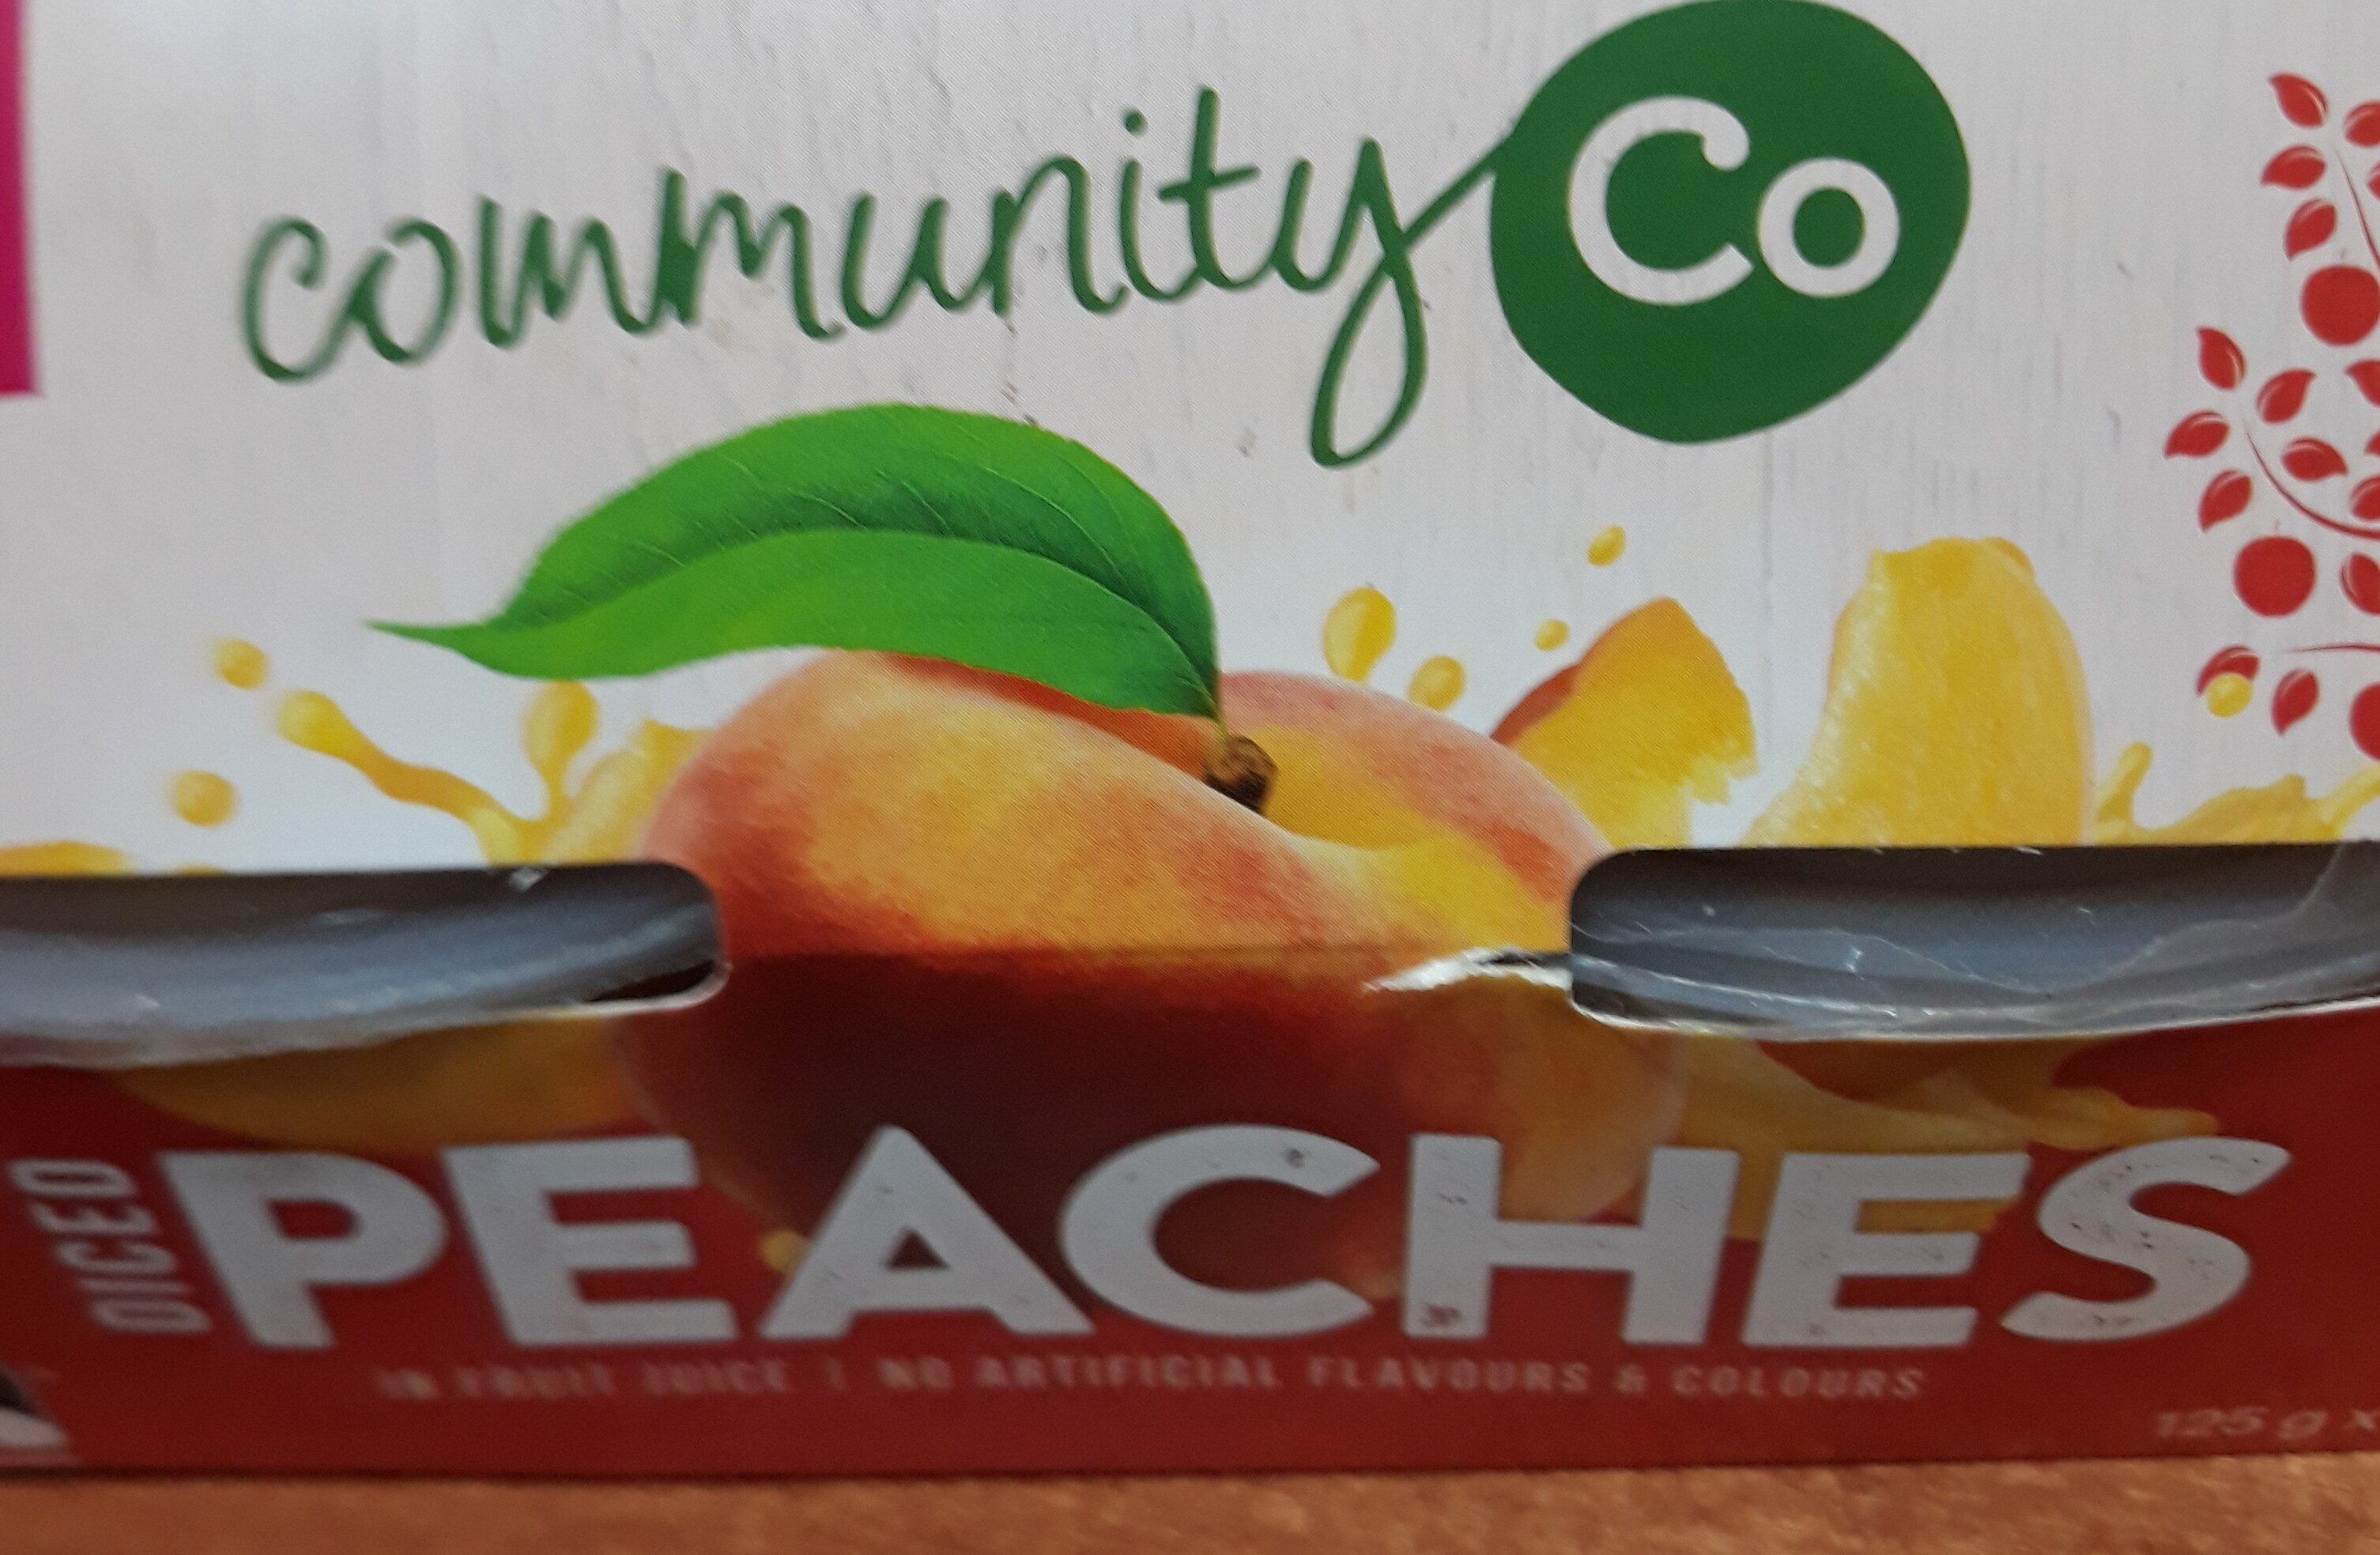 diced peaches - Product